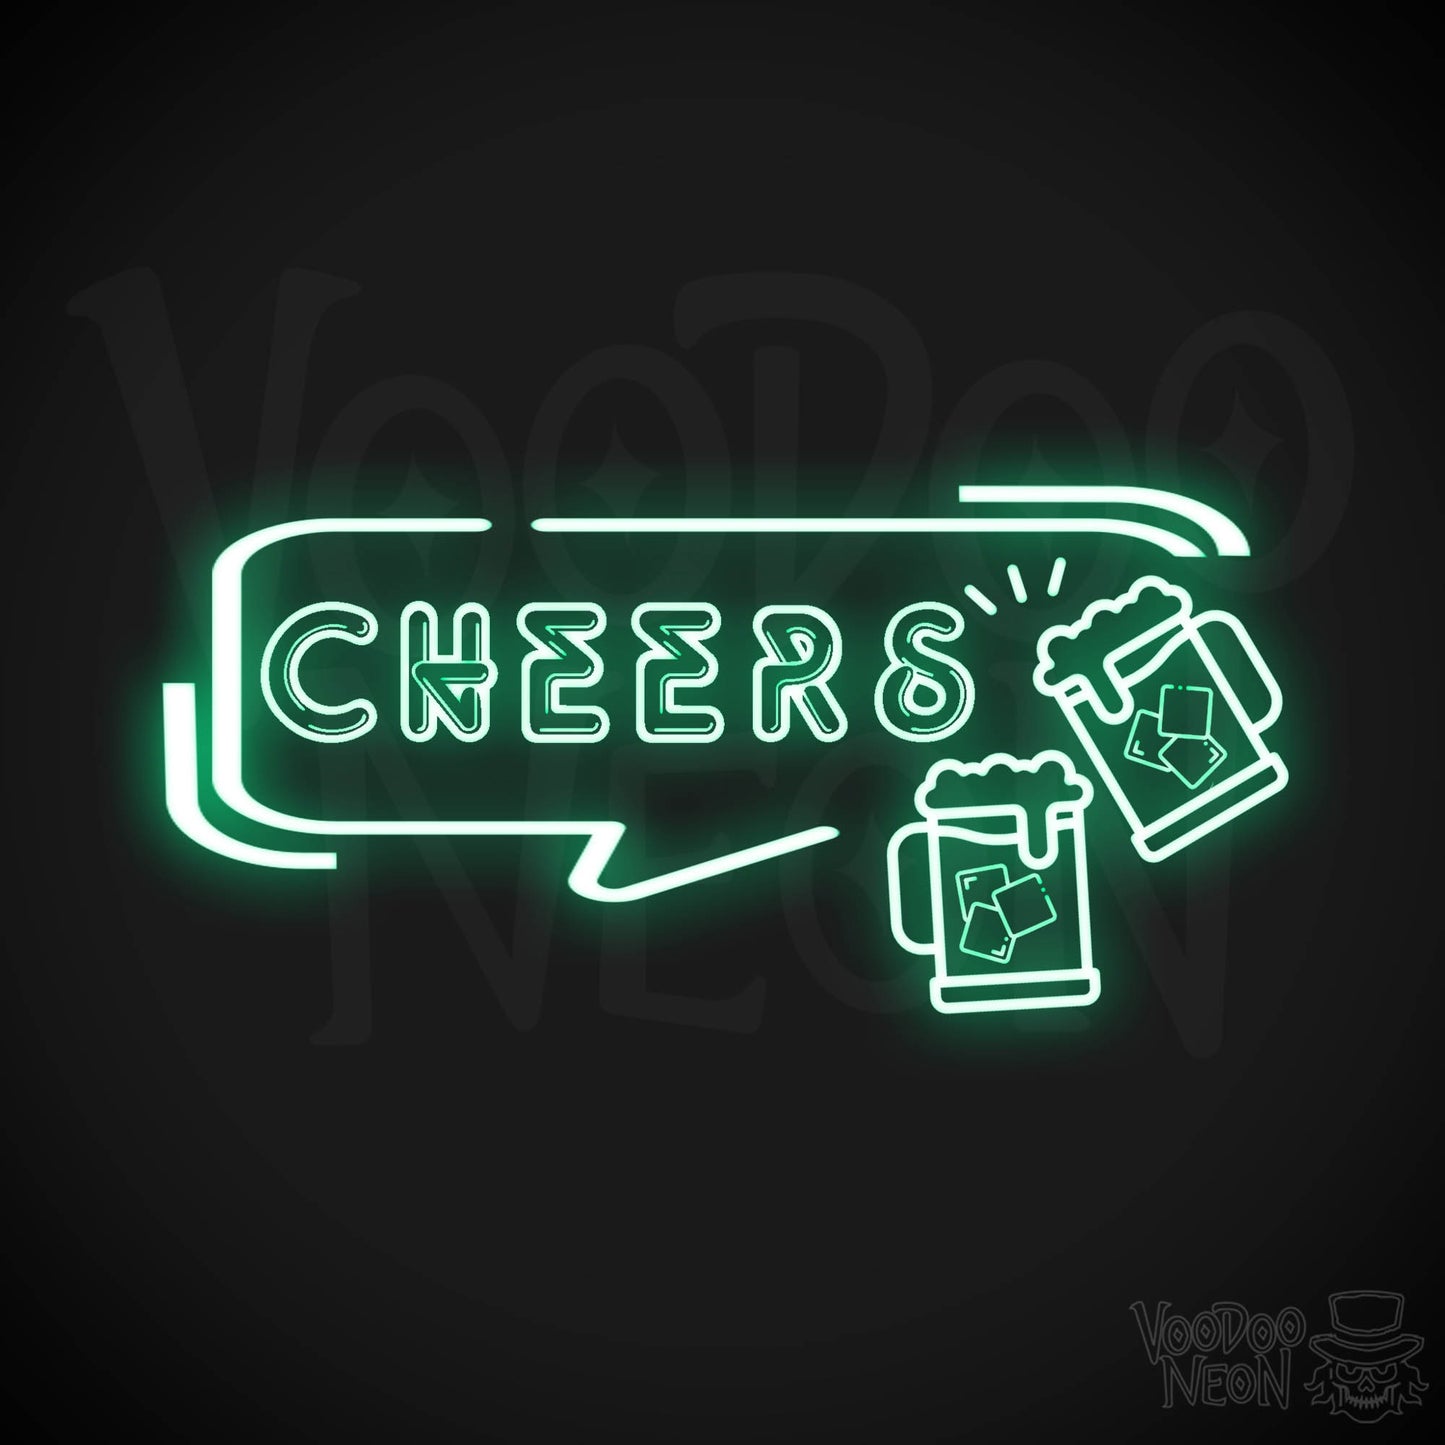 Cheers Neon Sign - Neon Cheers Bar Sign - LED Neon Wall Art - Color Green